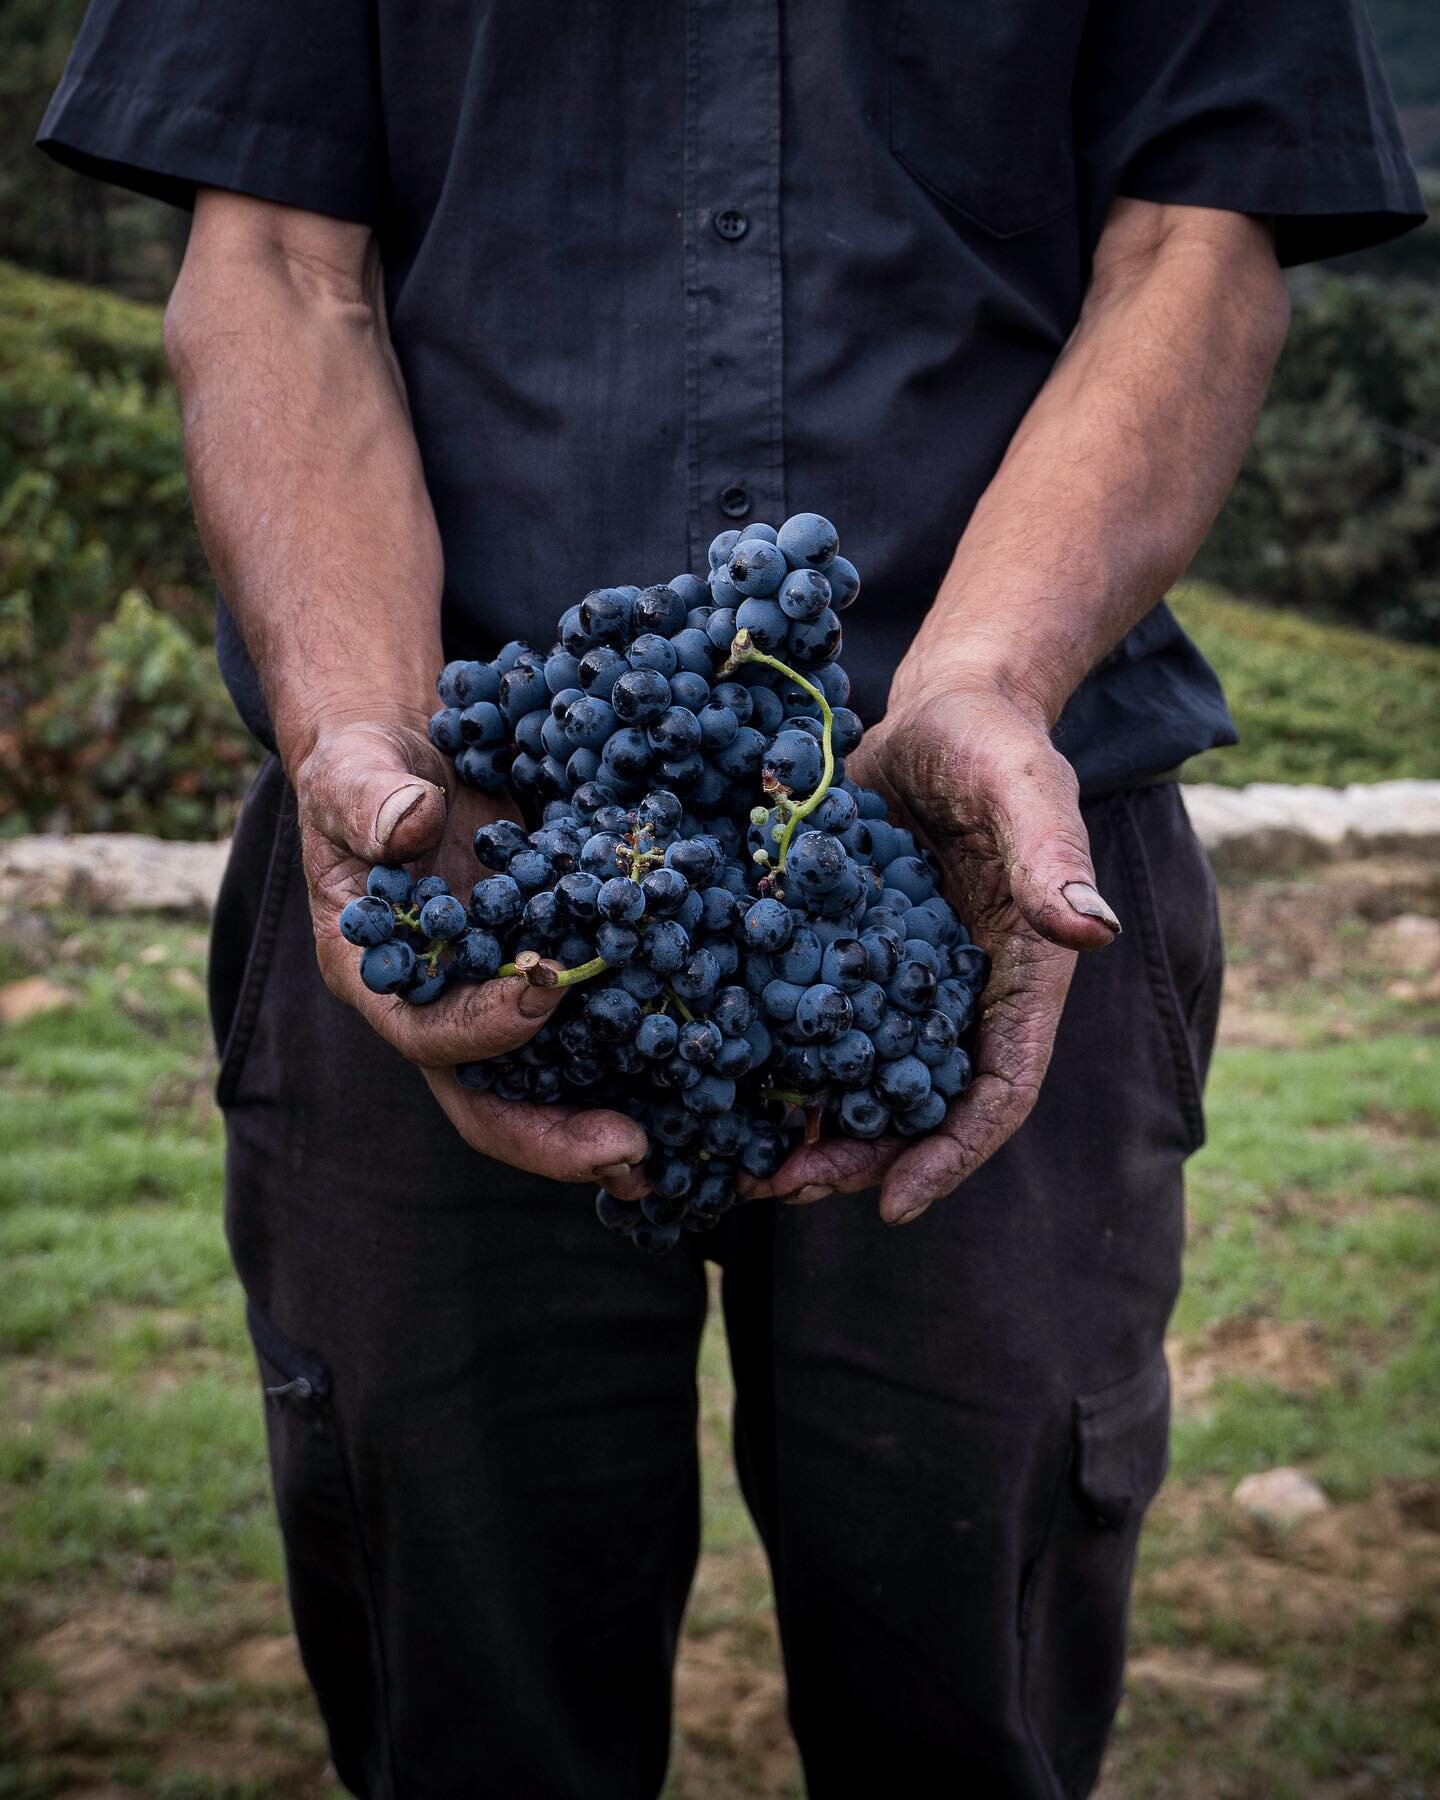 Pinotage is the most widely planted red varietal in the Breedekloof. Not only has our valley delivered more than one Top 10 Pinotage, we annually produce award-winning Cape Blends such as Opstal&rsquo;s Carl Everson Cape Blend and Botha&rsquo;s Turoc